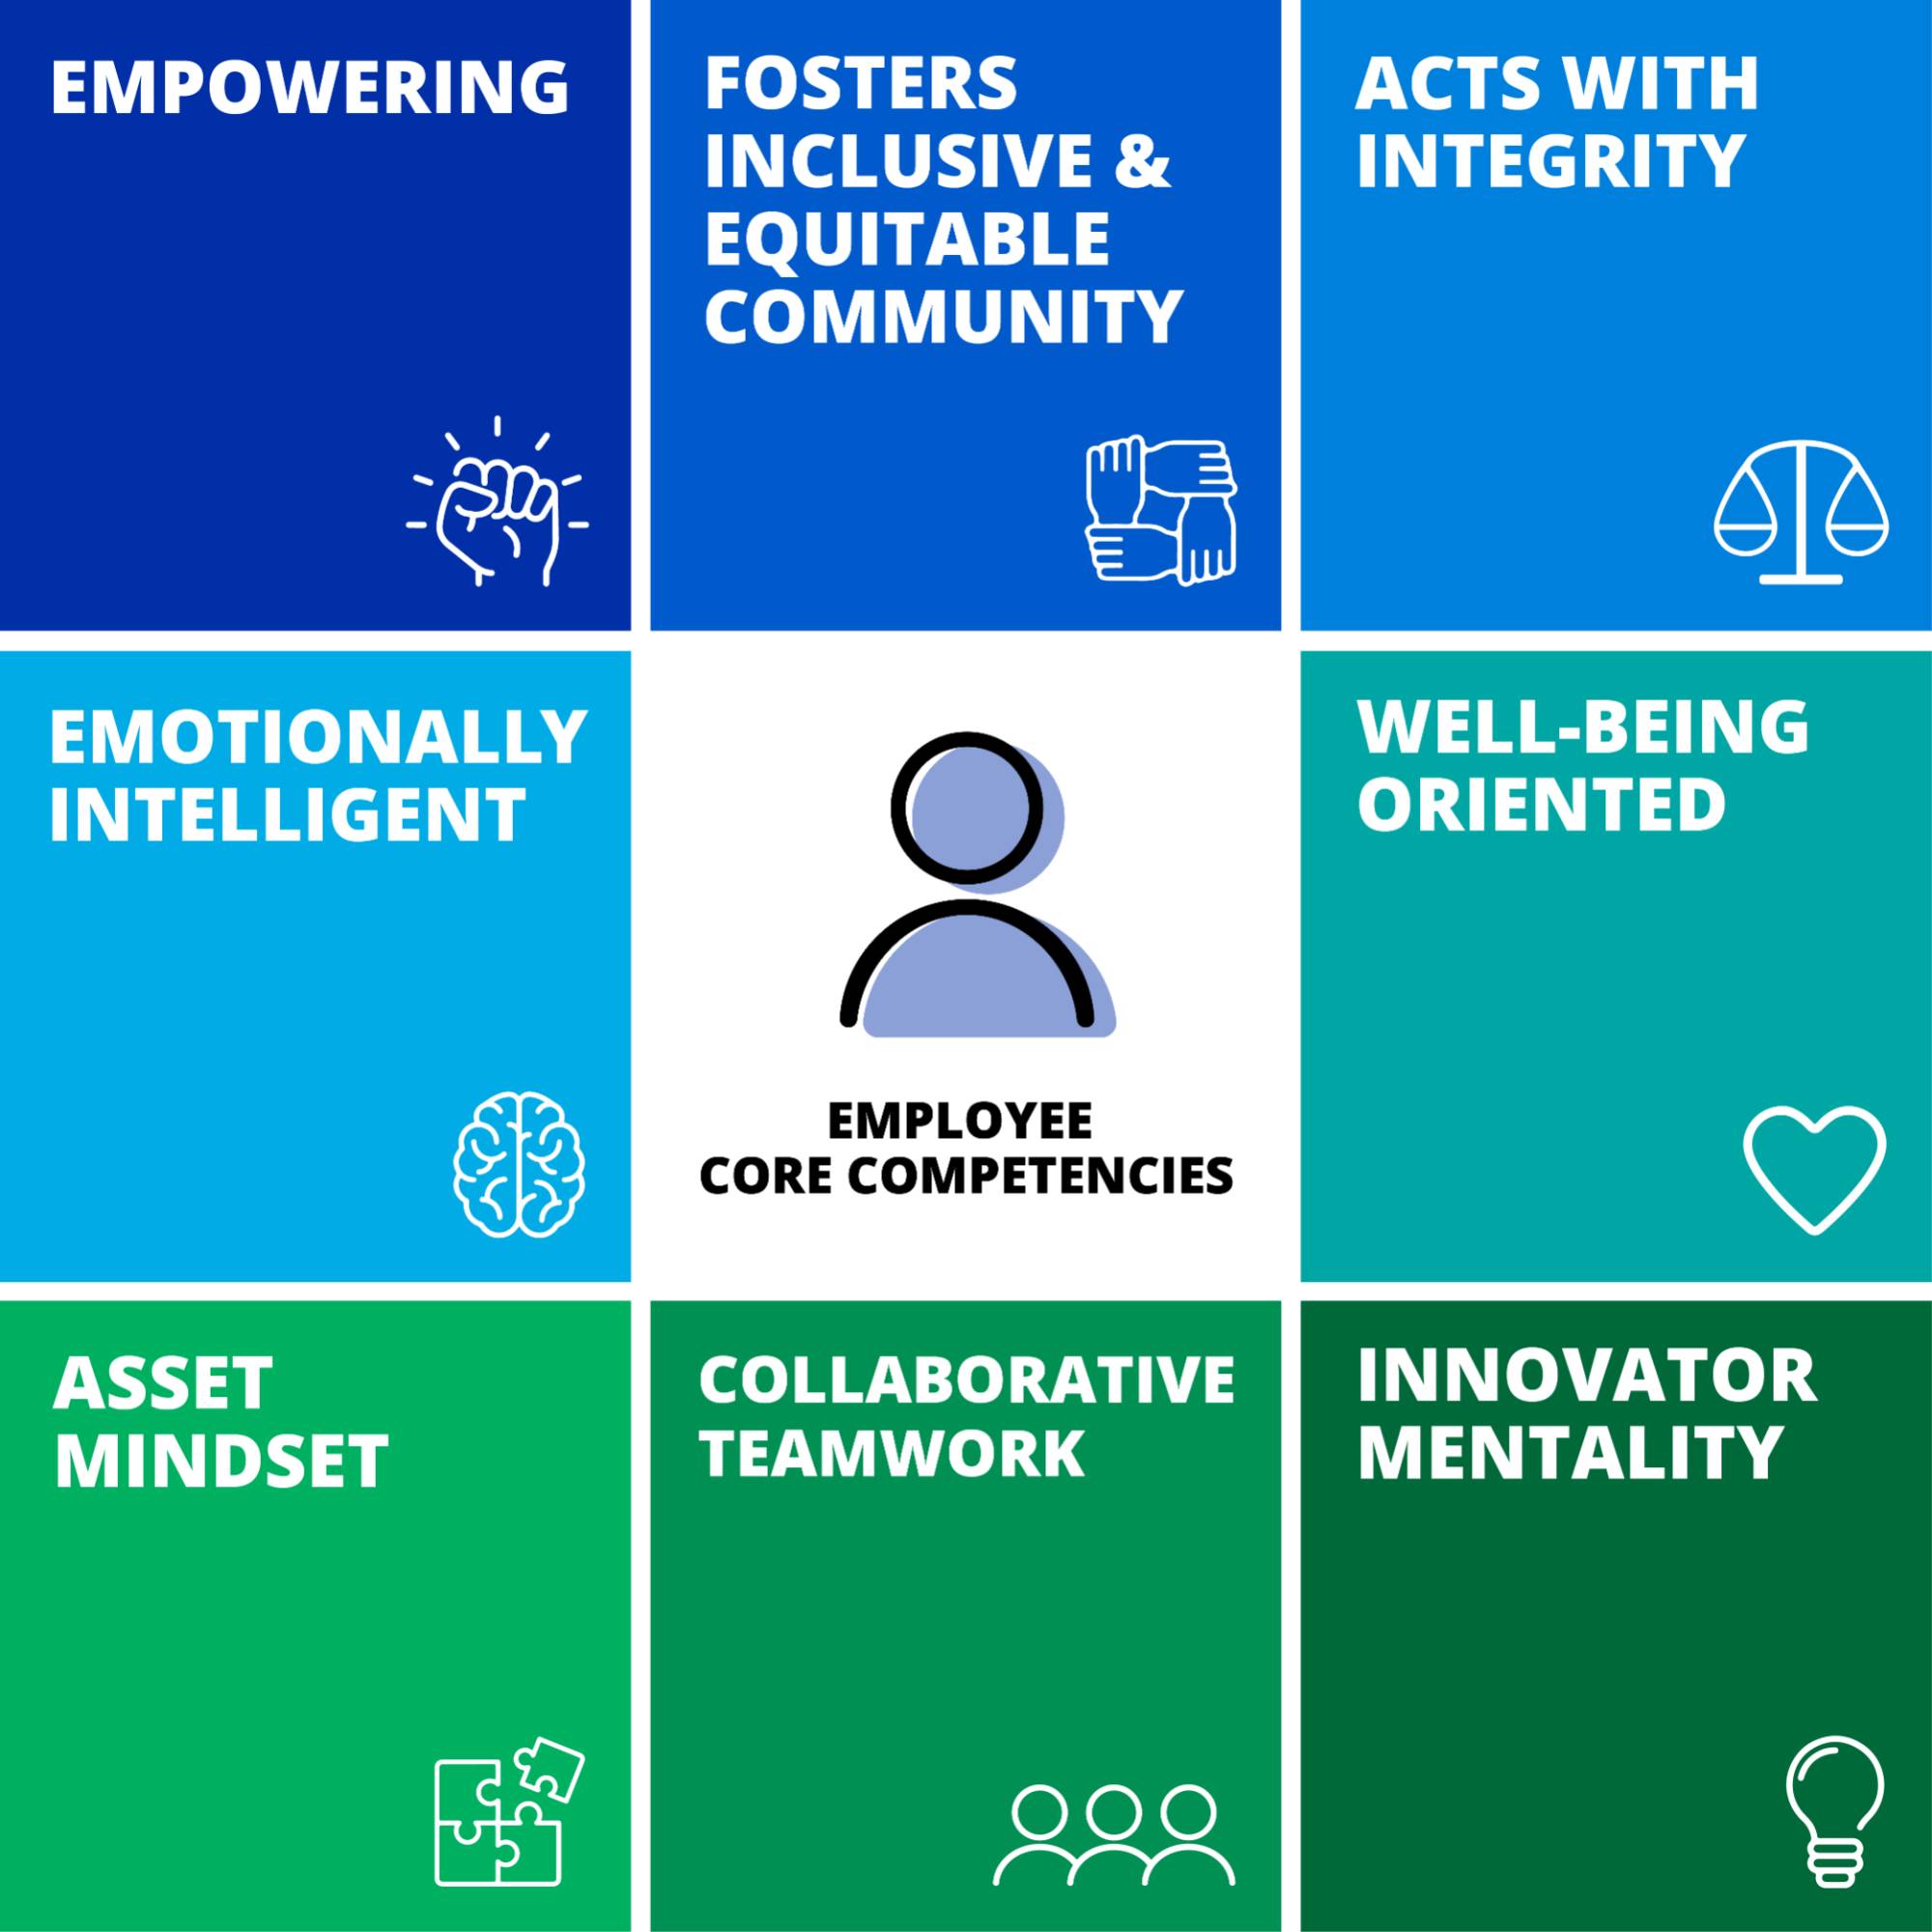 The 8 GVSU core competencies with icons: empowering, fosters inclusive and equitable community, acts with integrity, emotionally intelligent, well-being oriented, asset mindset, collaborative teamwork, and innovator mentality.